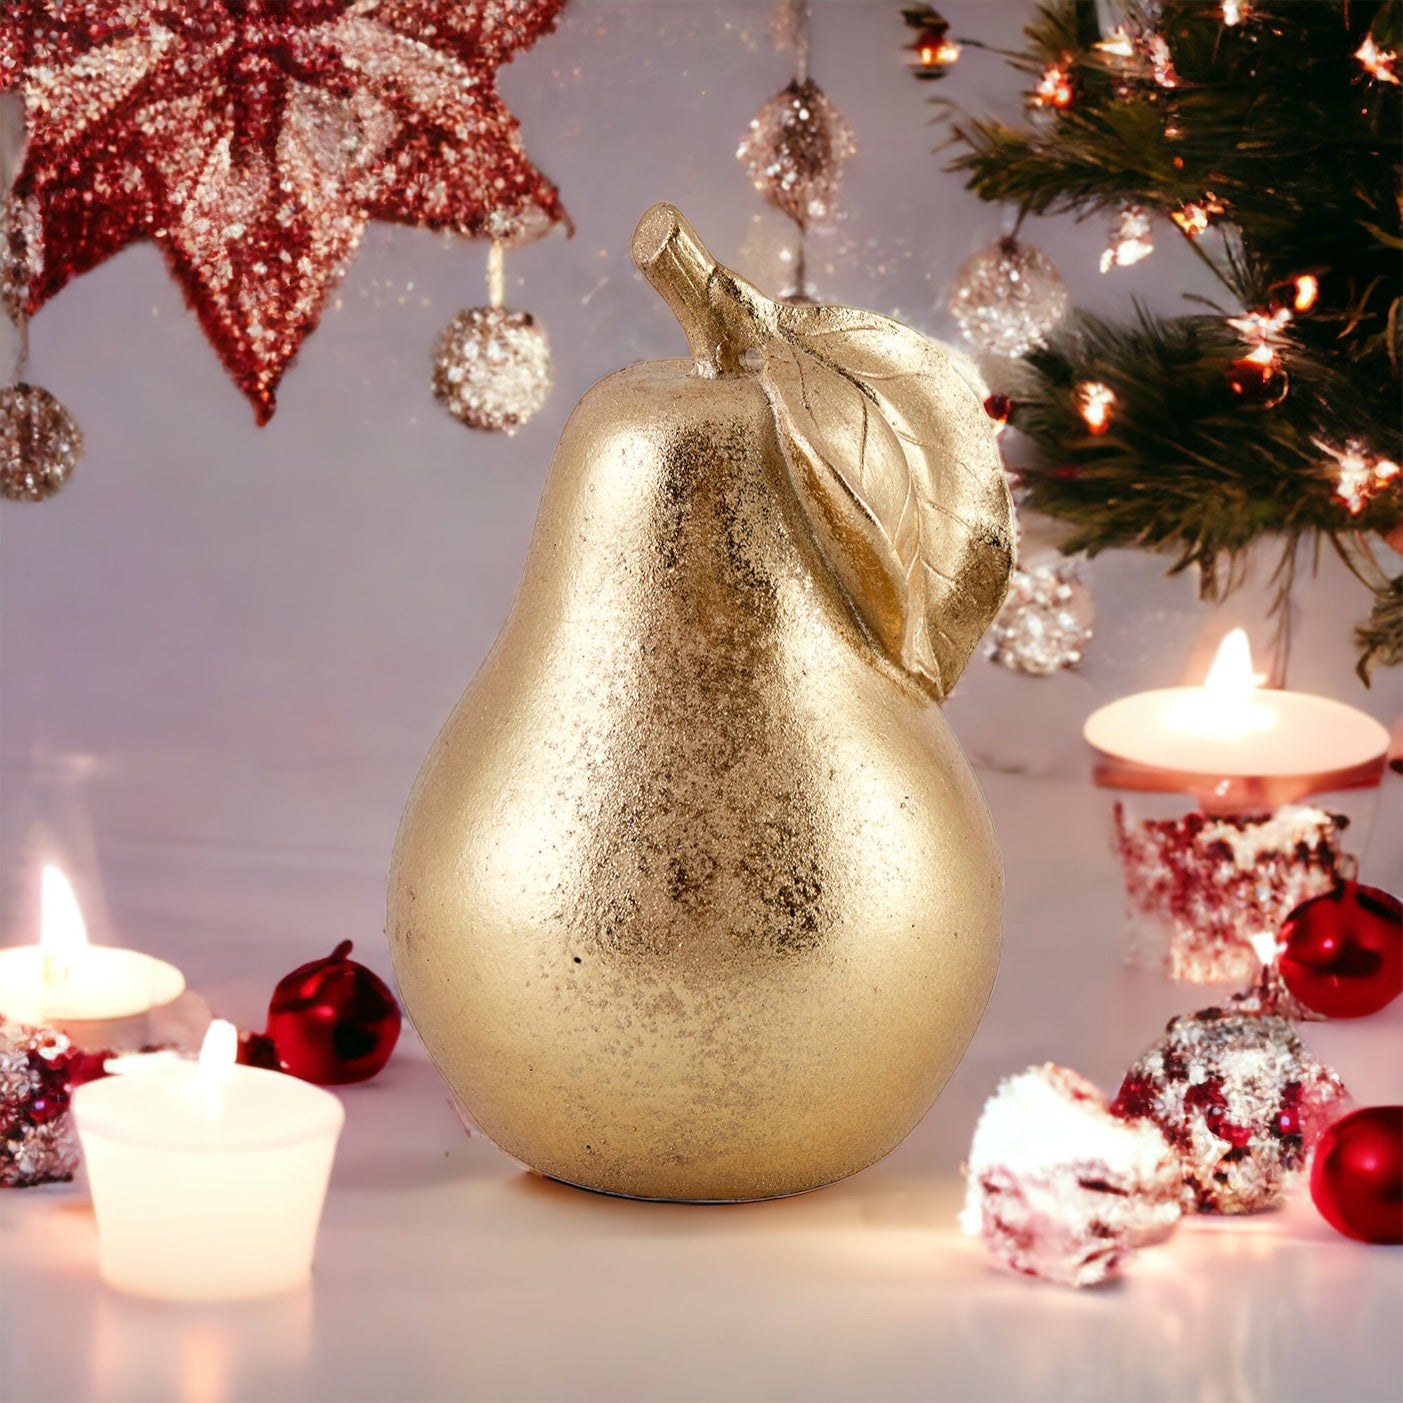 Pear sculpture in Gold colour.